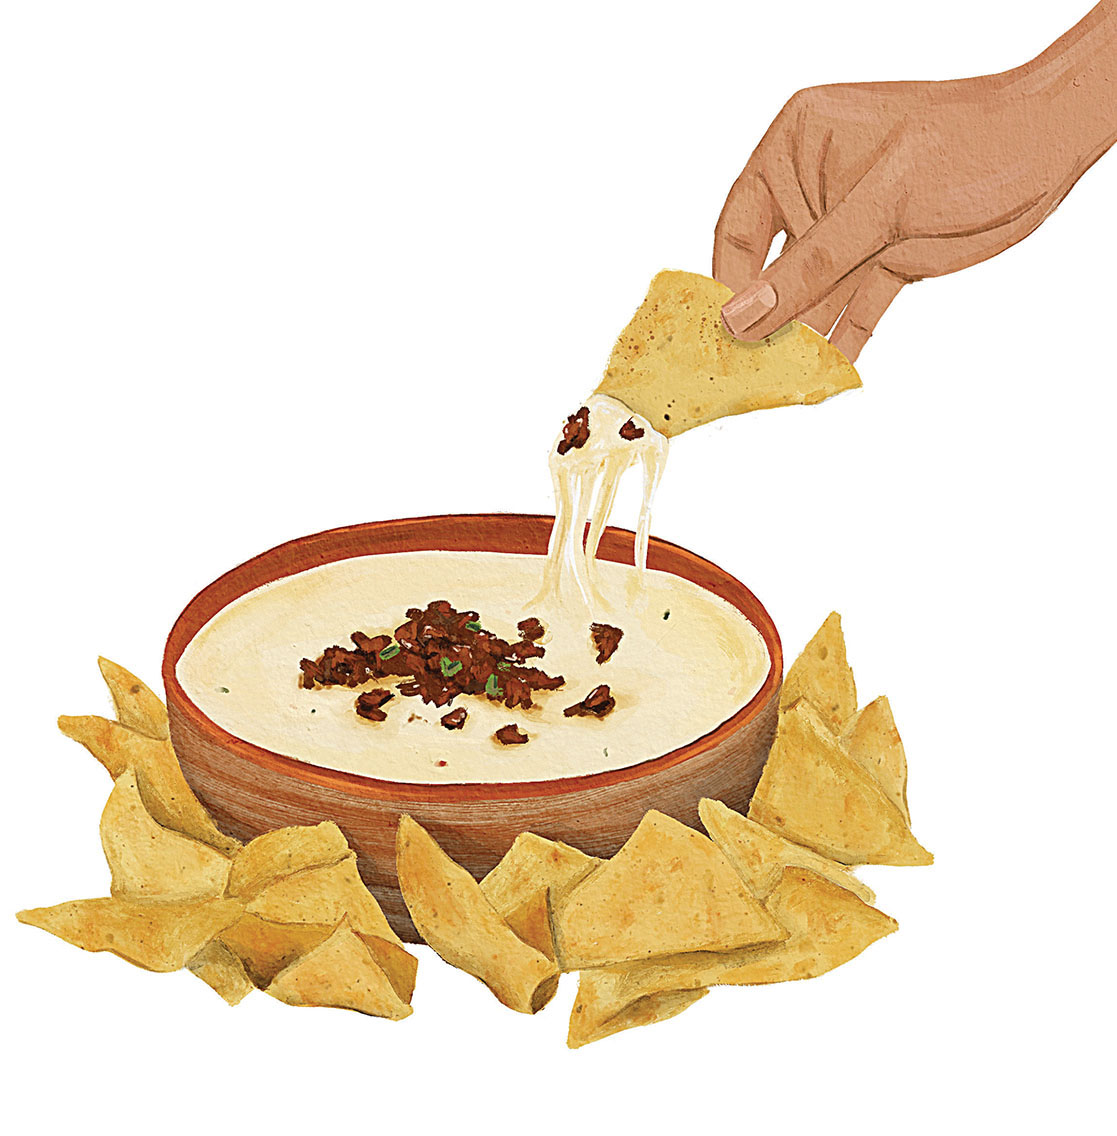 An illustration of a hand dipping into a bowl of cheesy dip